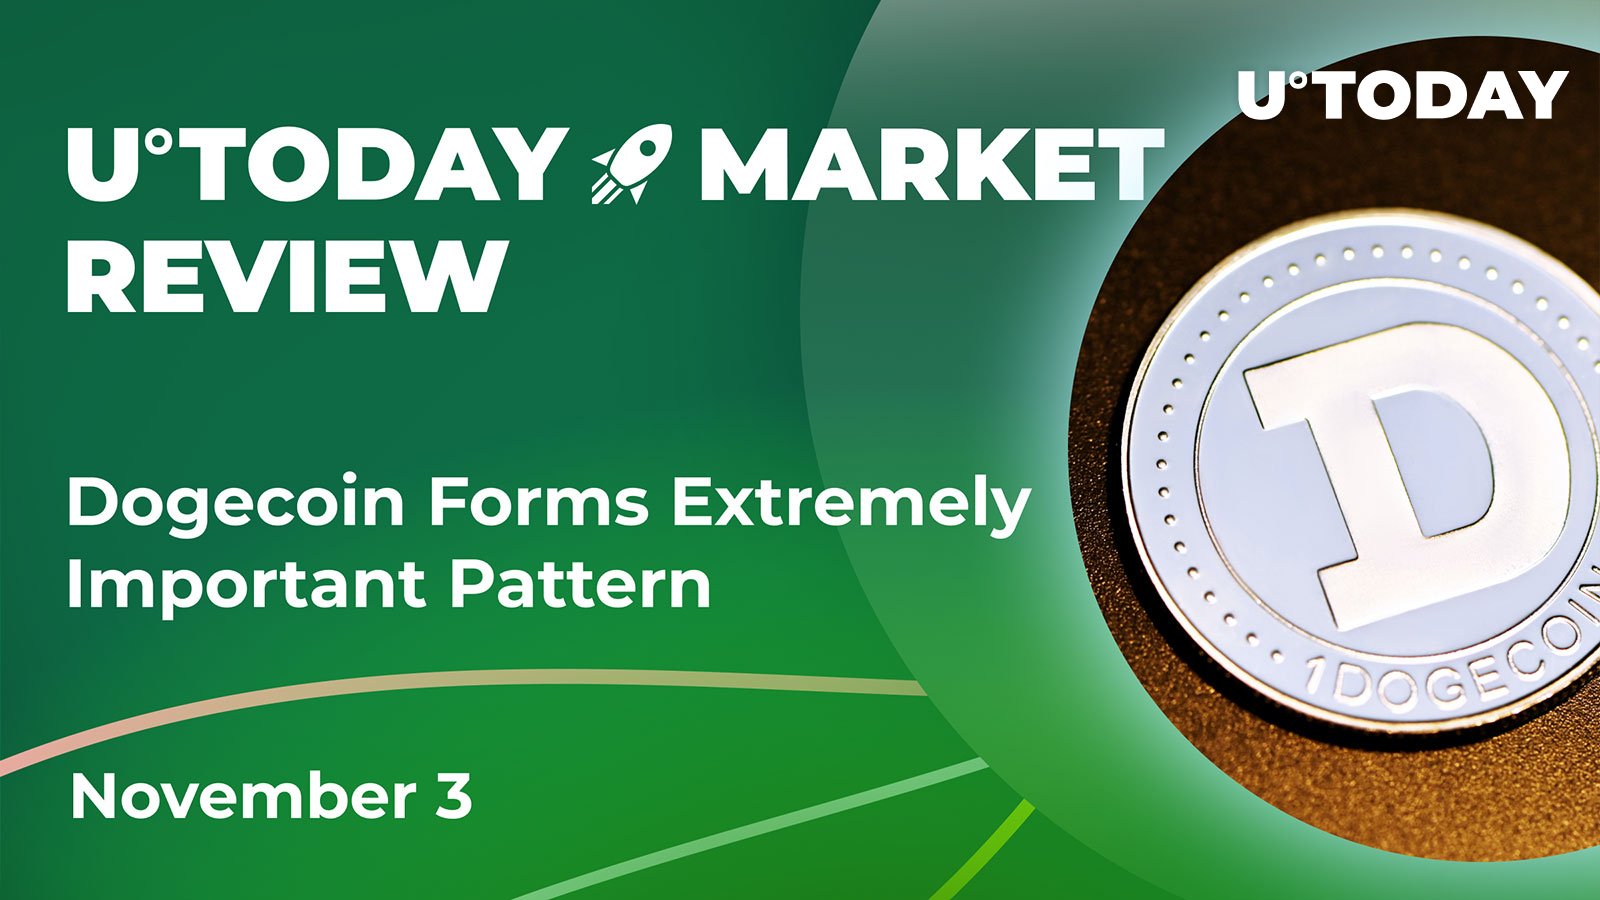 dogecoin-forms-extremely-important-pattern-crypto-market-review-november-3